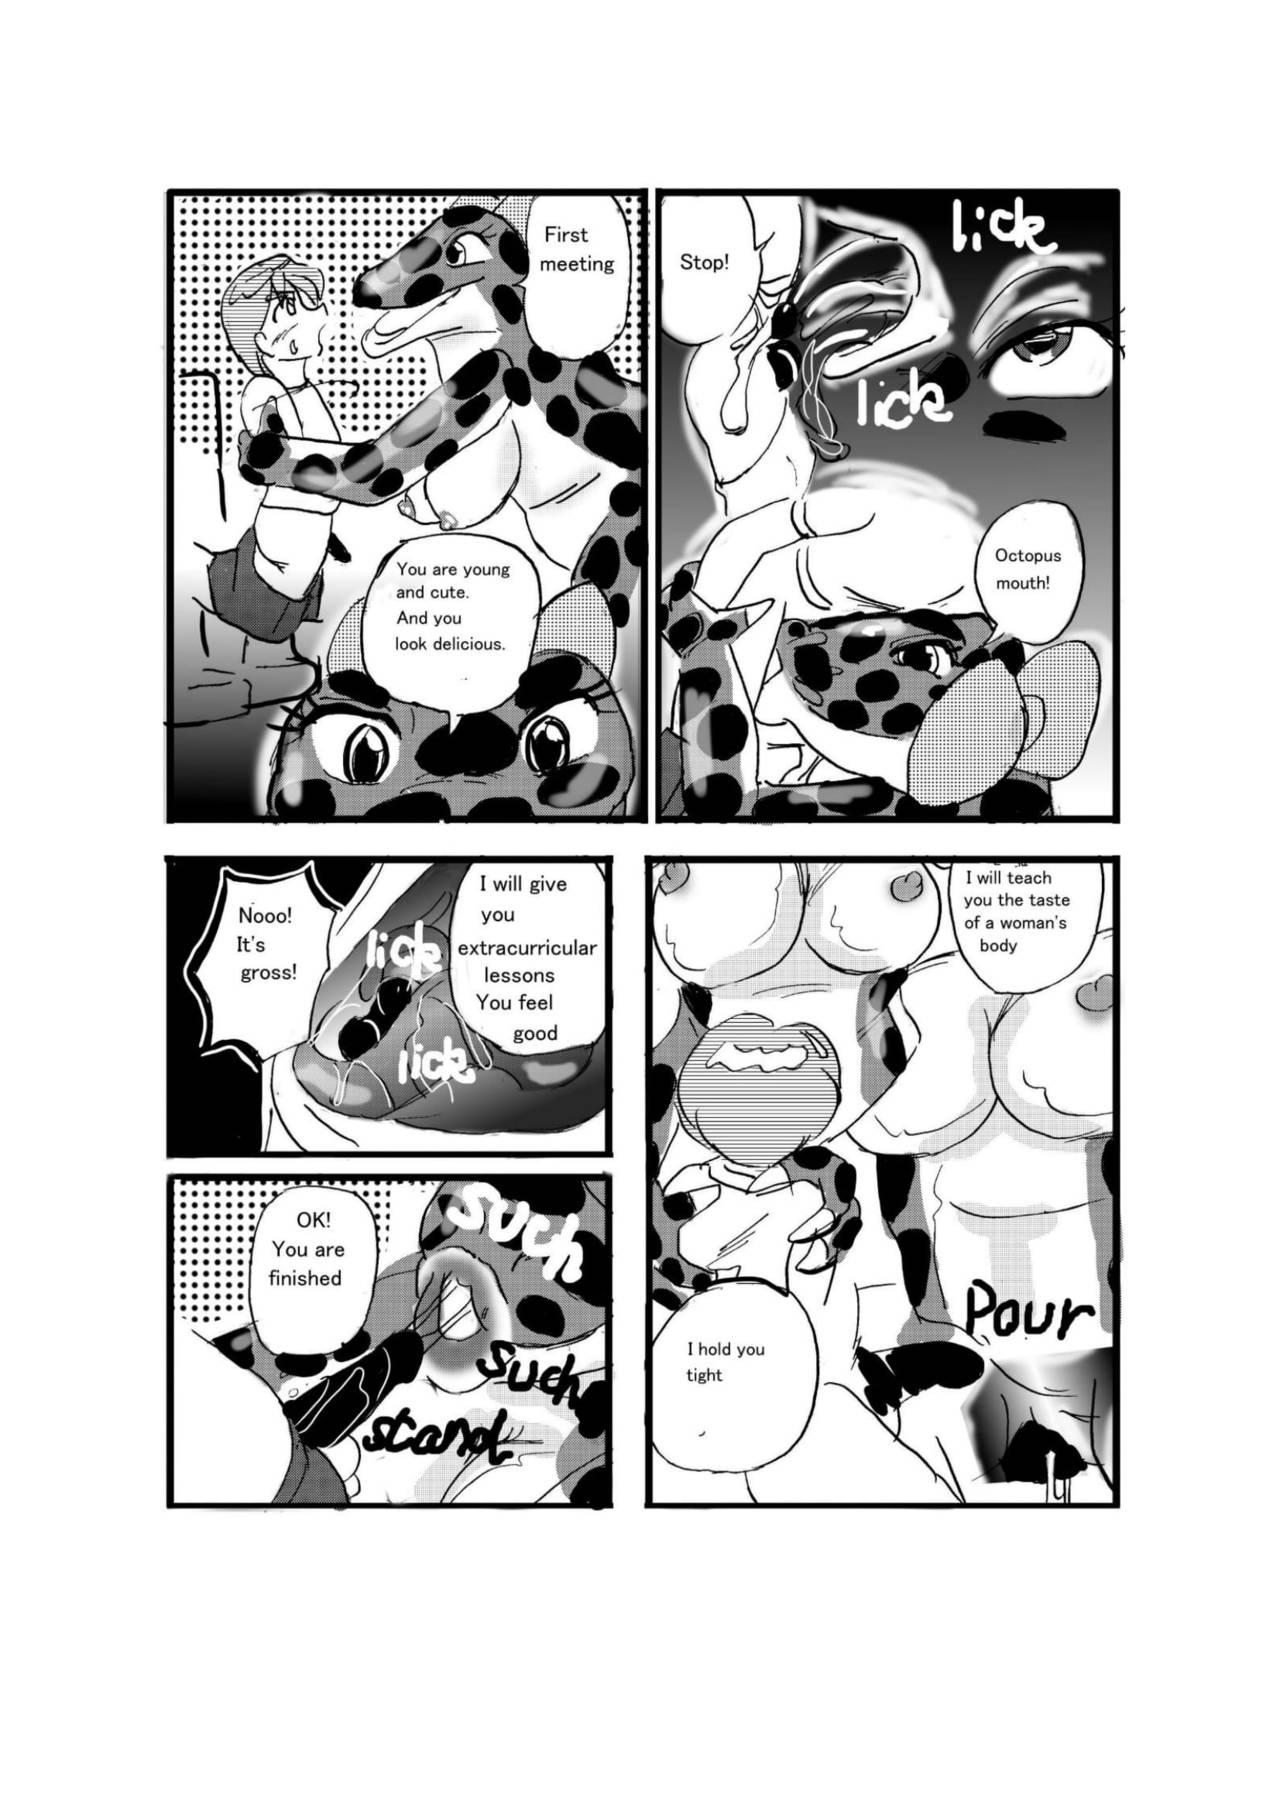 Sucks Swallowed Whole vol.2 Waniko + What's Digestion? - Original Point Of View - Page 4